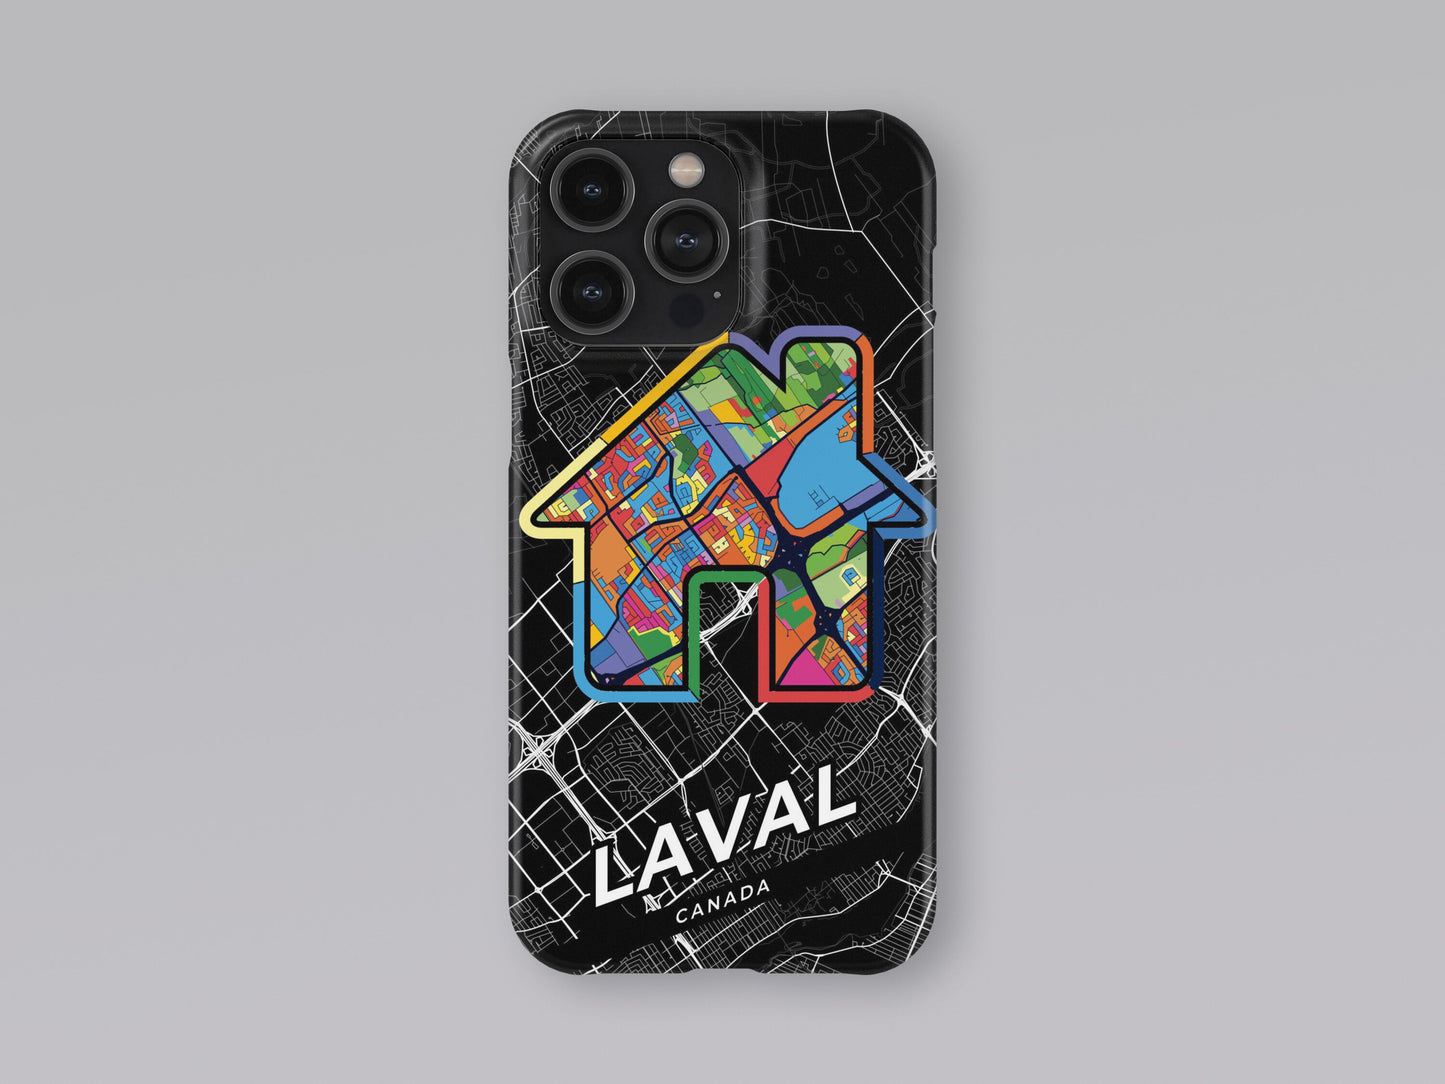 Laval Canada slim phone case with colorful icon. Birthday, wedding or housewarming gift. Couple match cases. 3